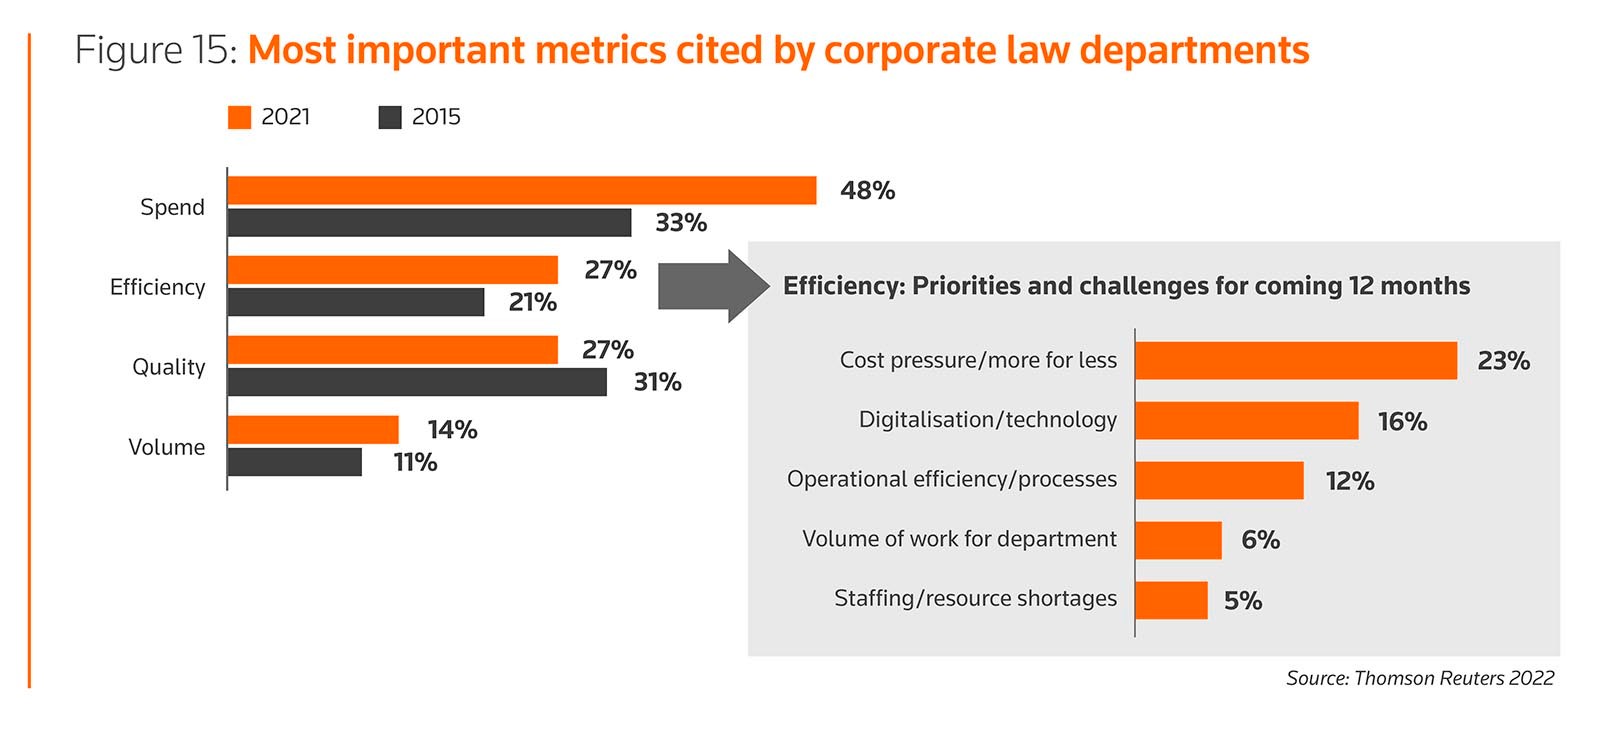 Most important metrics cited by corporate law departments